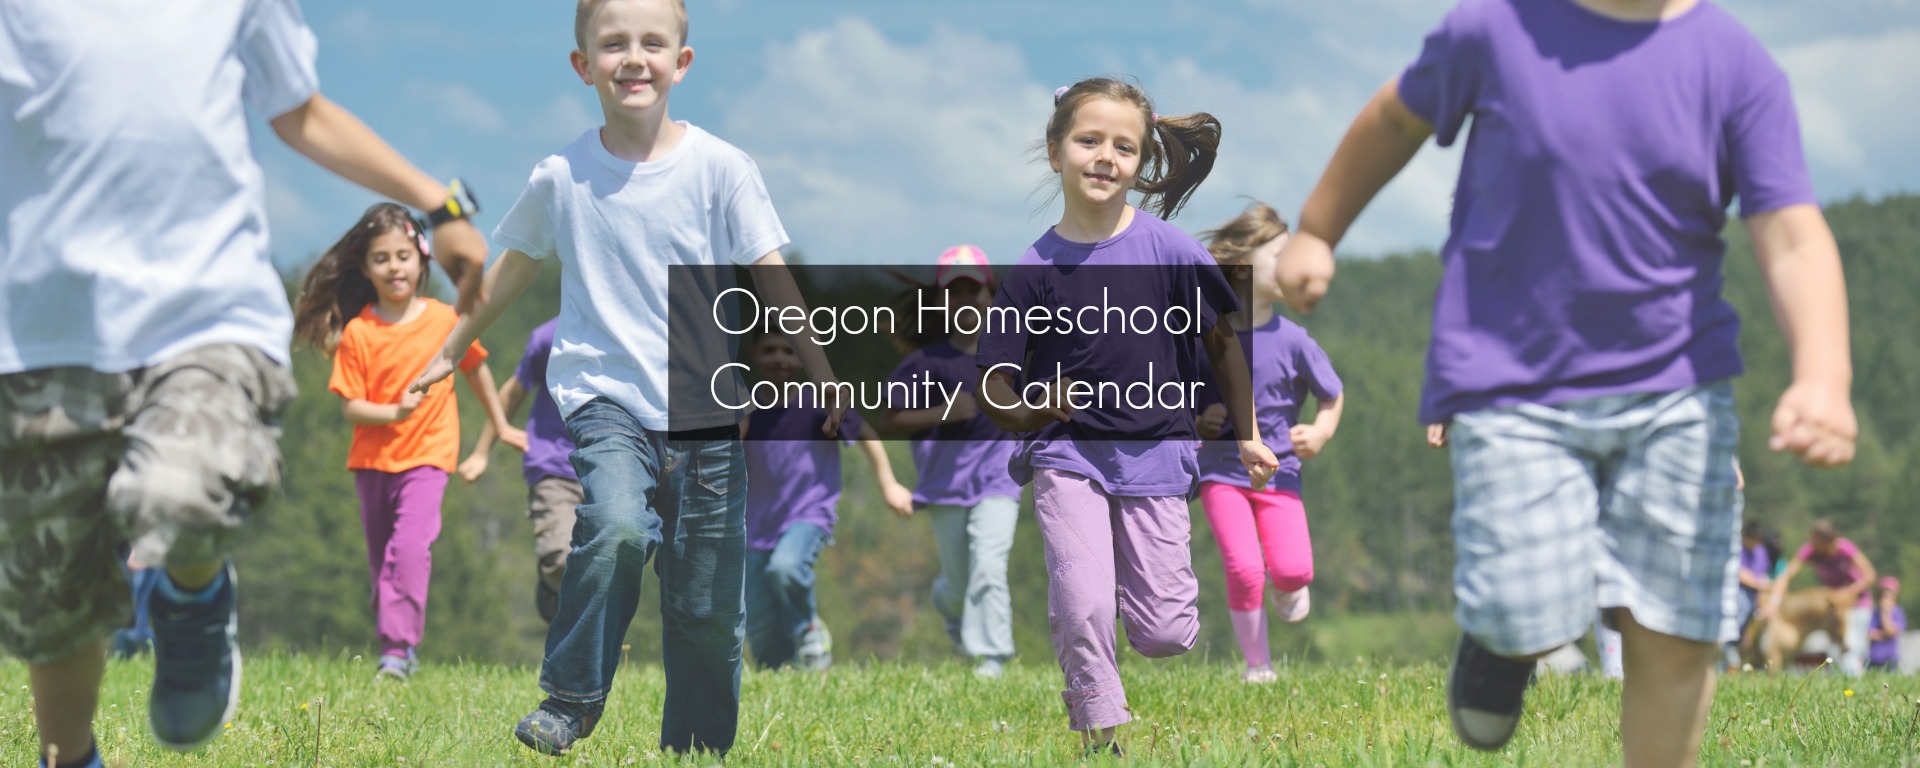 Find out what's going on and connect with homeschoolers at the Oregon Homeschool Community Calendar